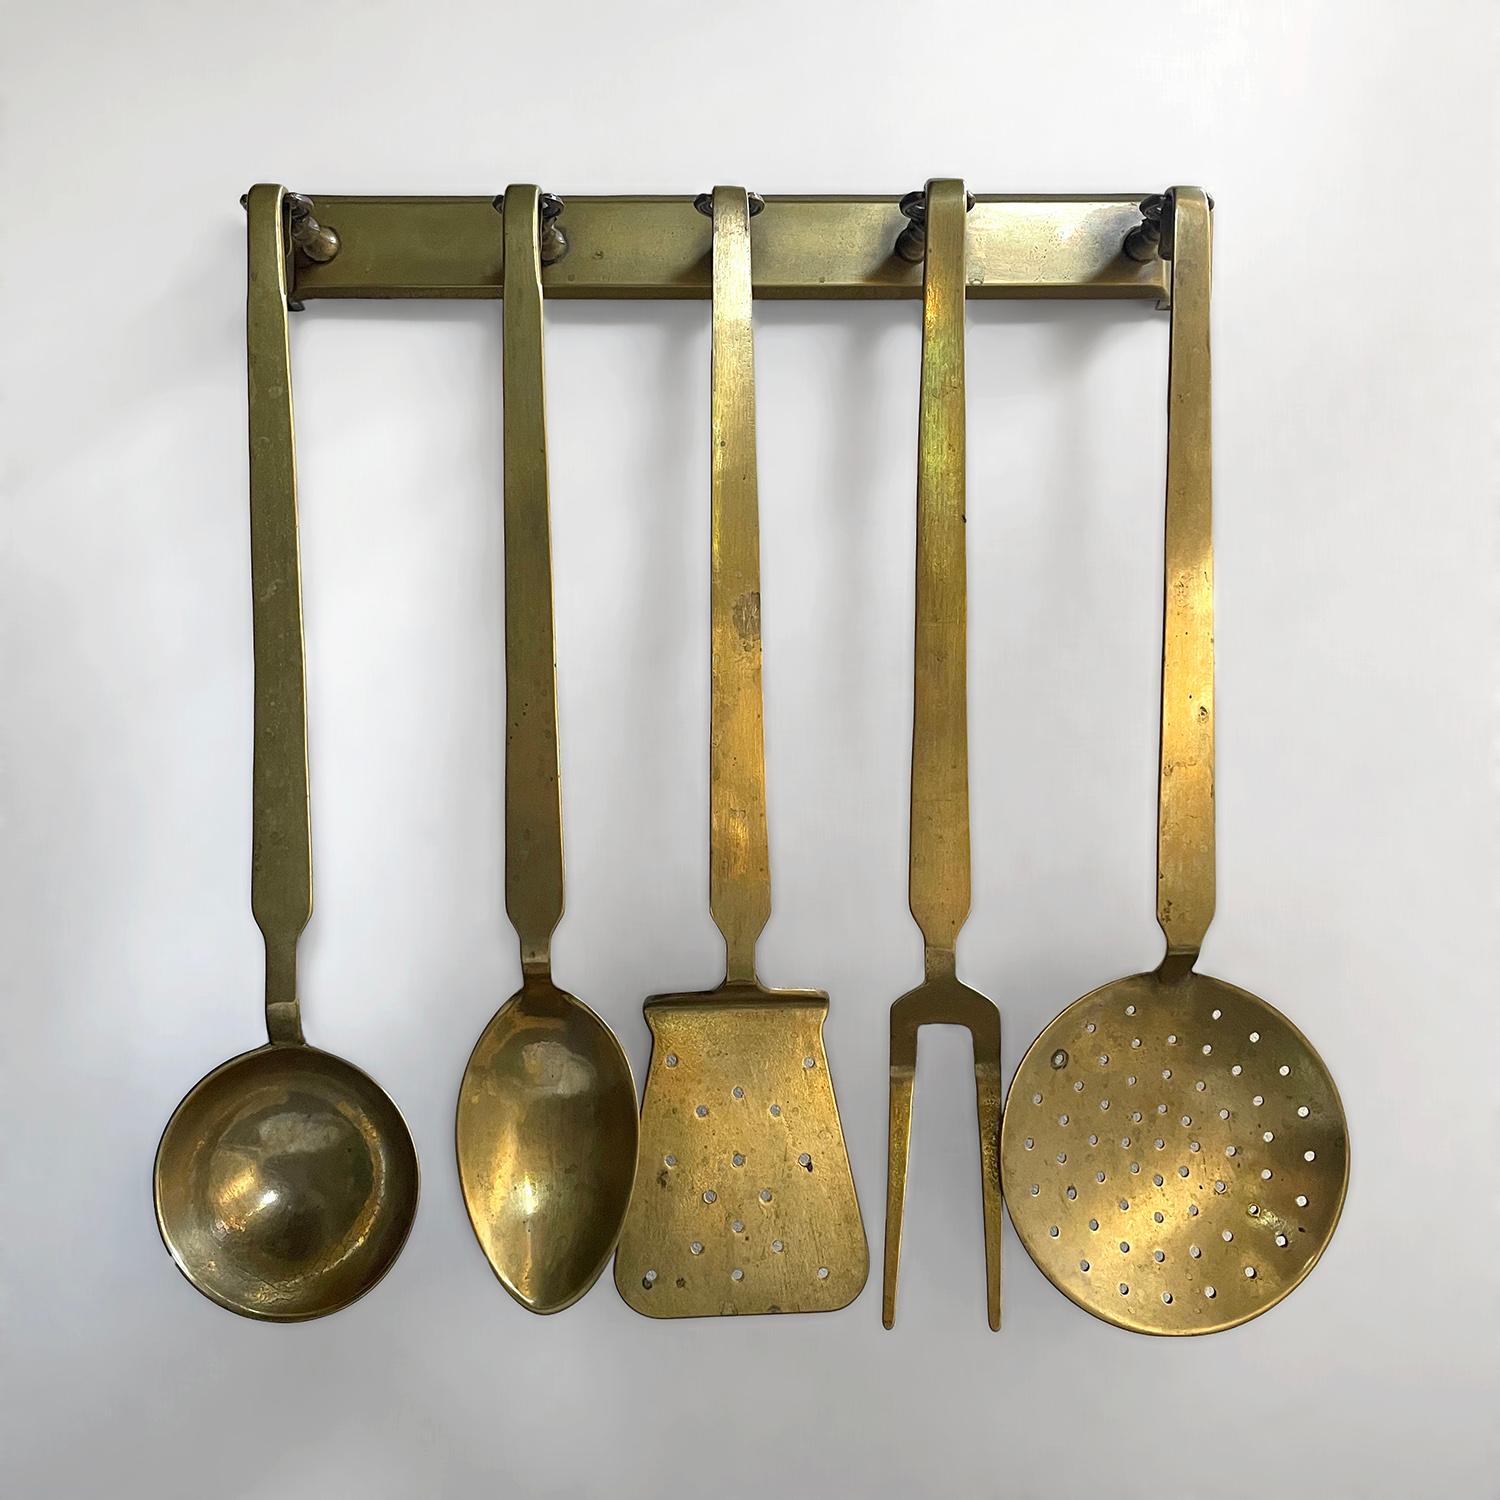 French aged brass cooking set
Lovely addition to any French style kitchen 
This rare find will last the test of time
Five piece aged brass cooking set includes 
Spatula, slotted spoon, spoon, ladle and fork
Each piece is suspended from an individual